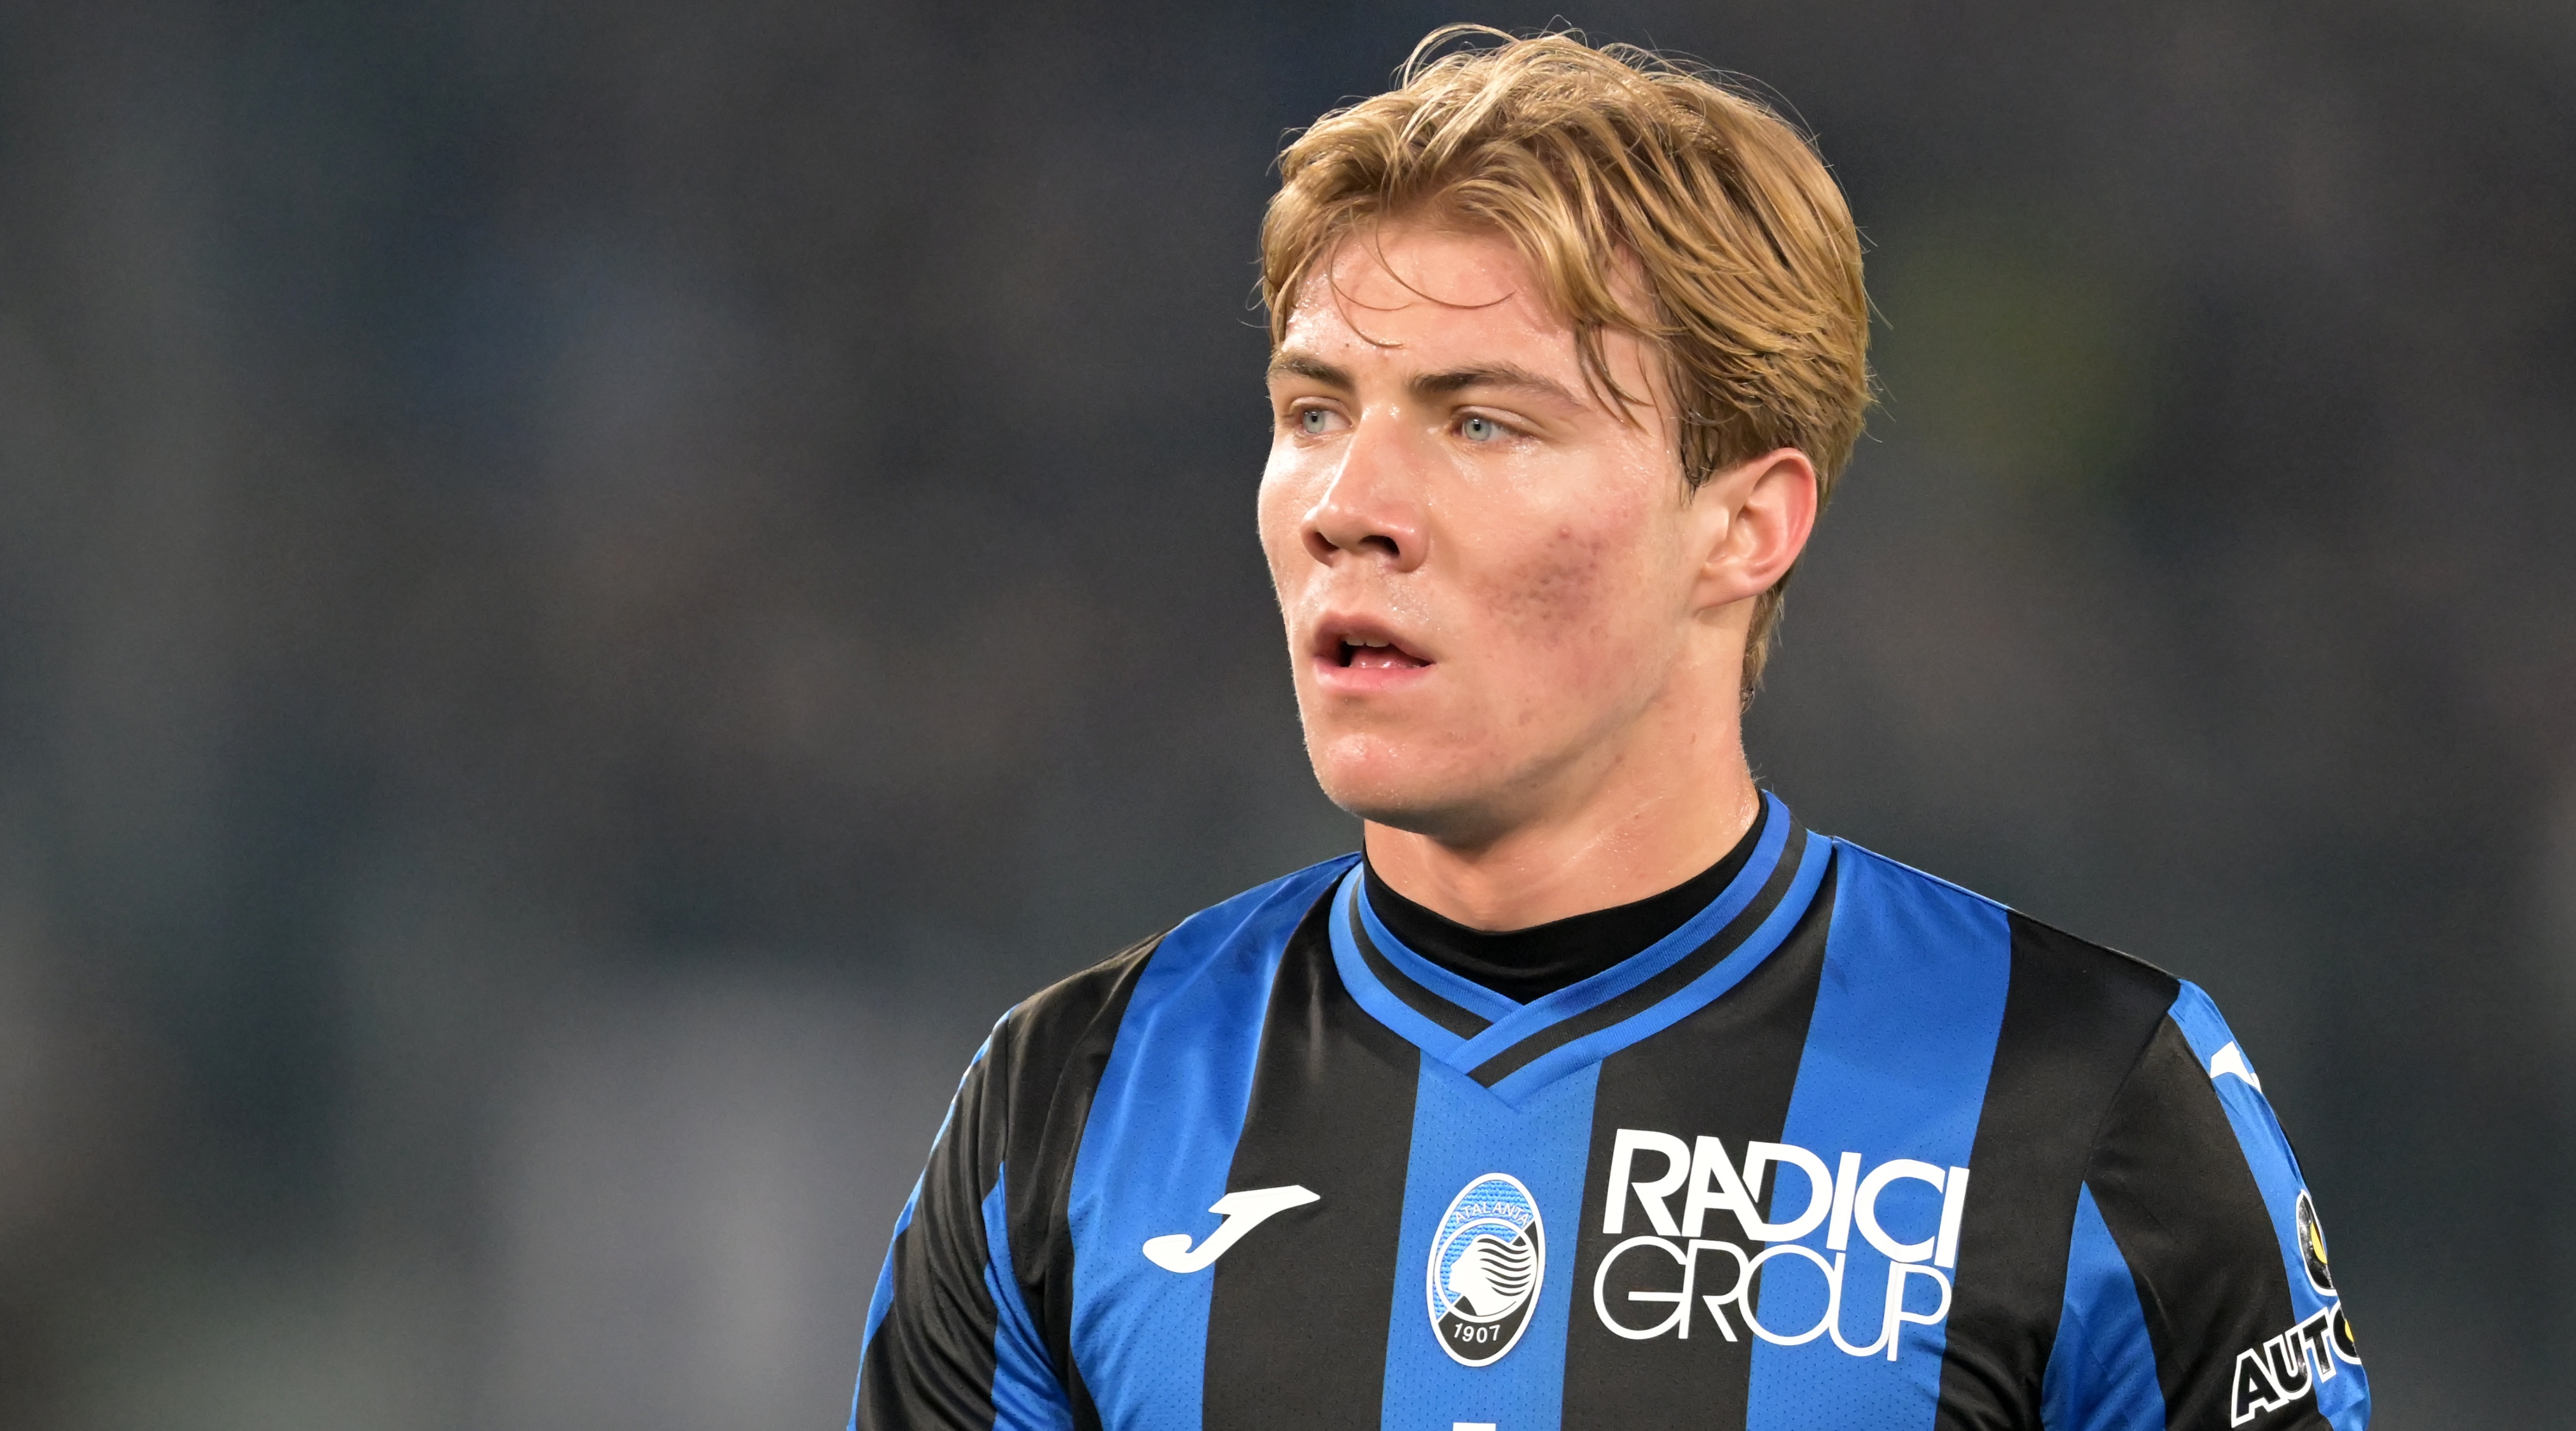 Manchester United rumoured transfer target Rasmus Hojlund looks on during the Serie A match between Lazio and Atalanta at the Stadio Olimpico on 11 February, 2023 in Rome, Italy.